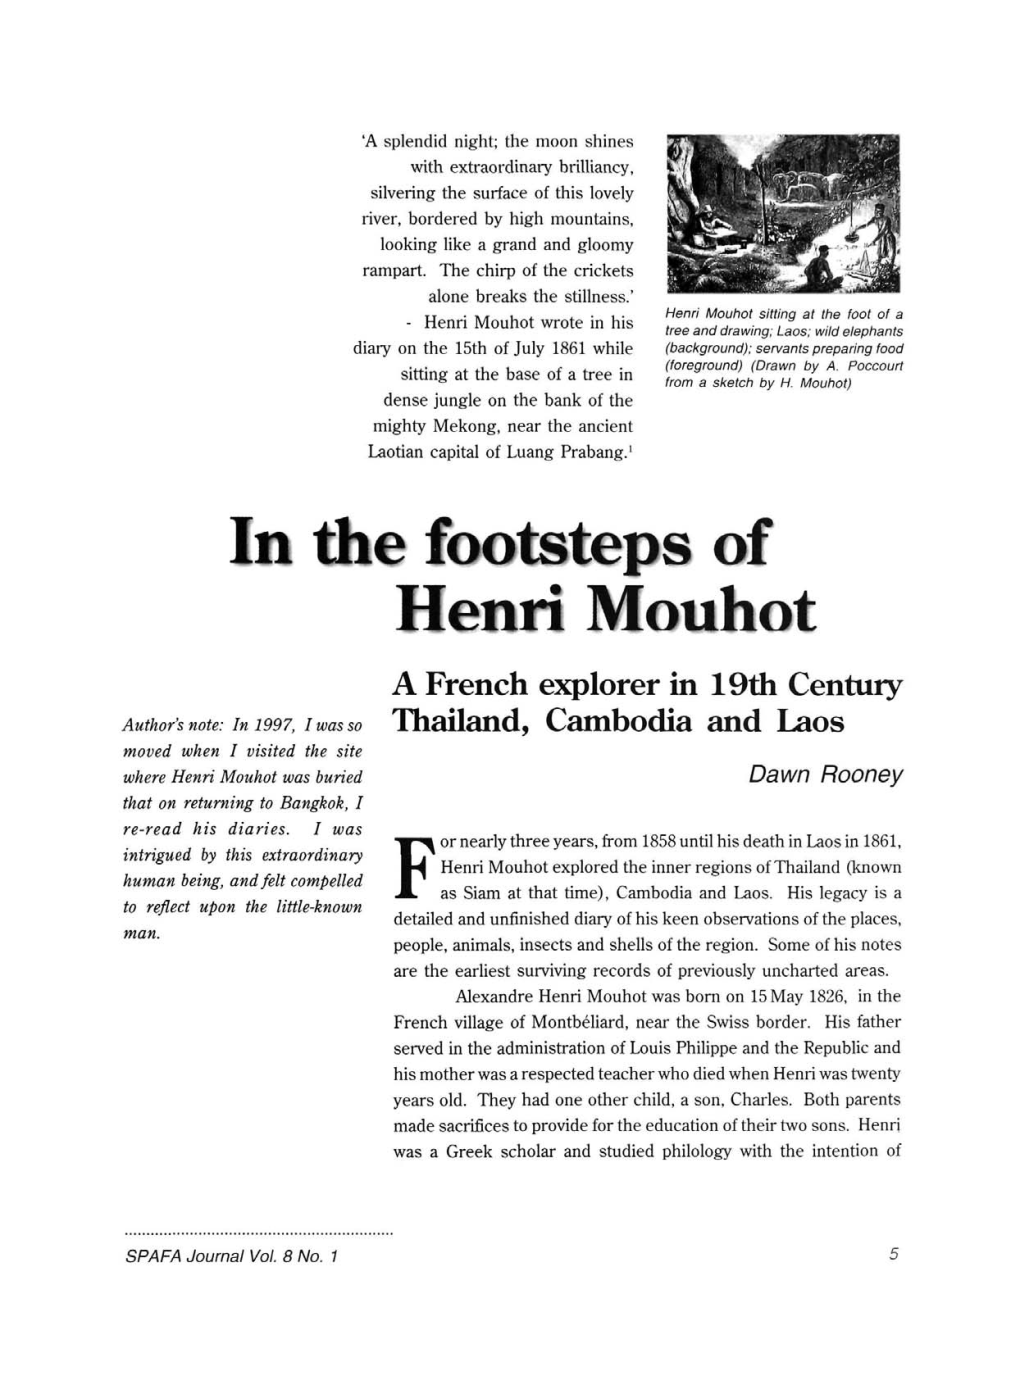 In the Footsteps of Henri Mouhot